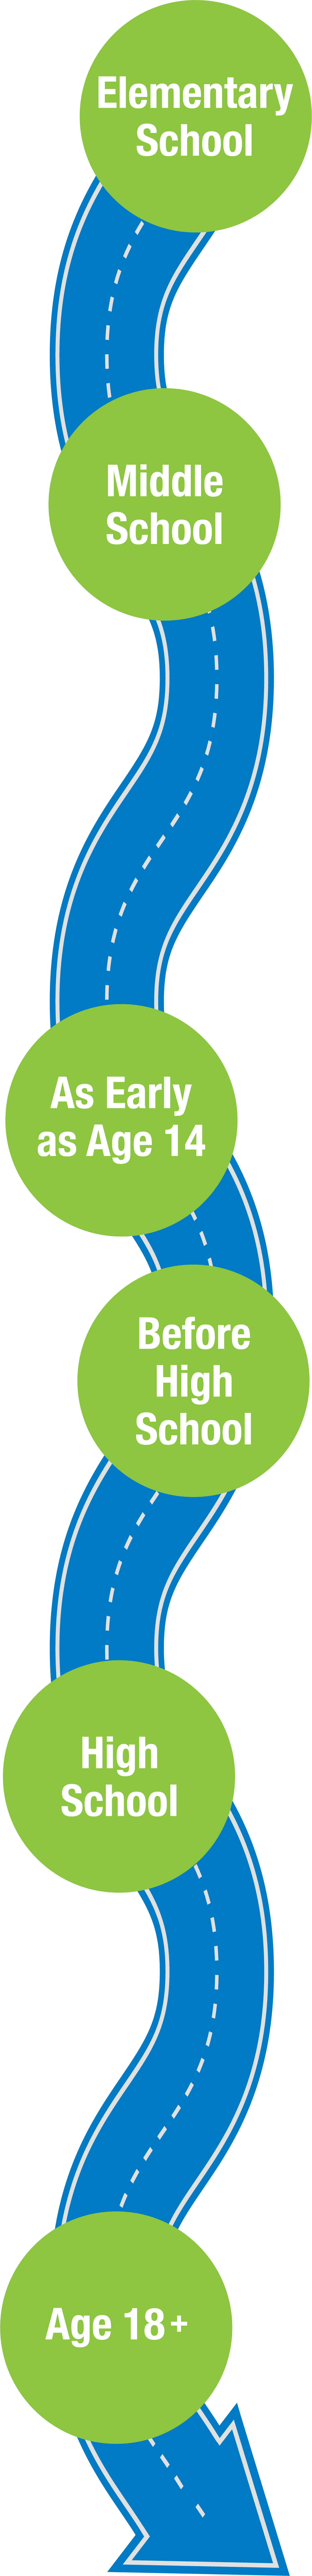 Illustration of a road map with segments of steps from Elementary School to Age 18